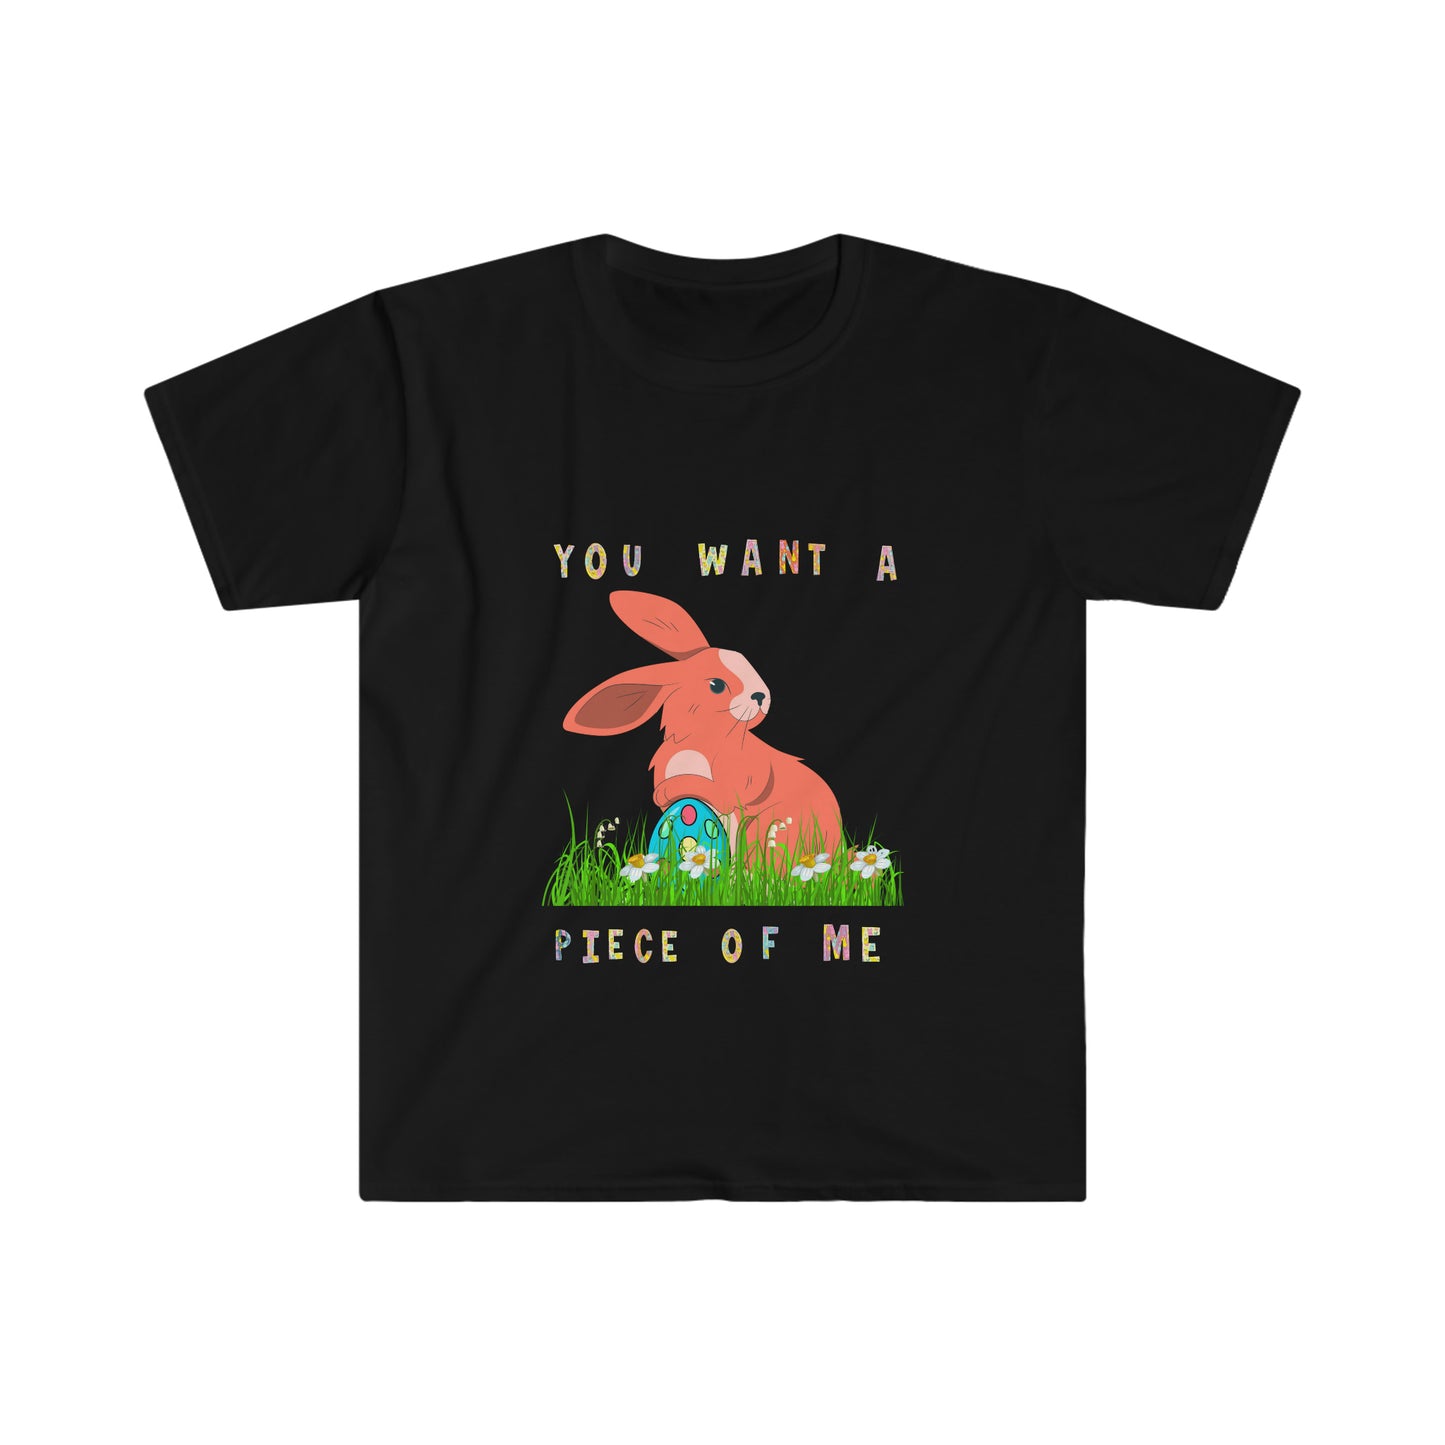 "You Want a Piece of Me" Unisex Essential Comfort Tee